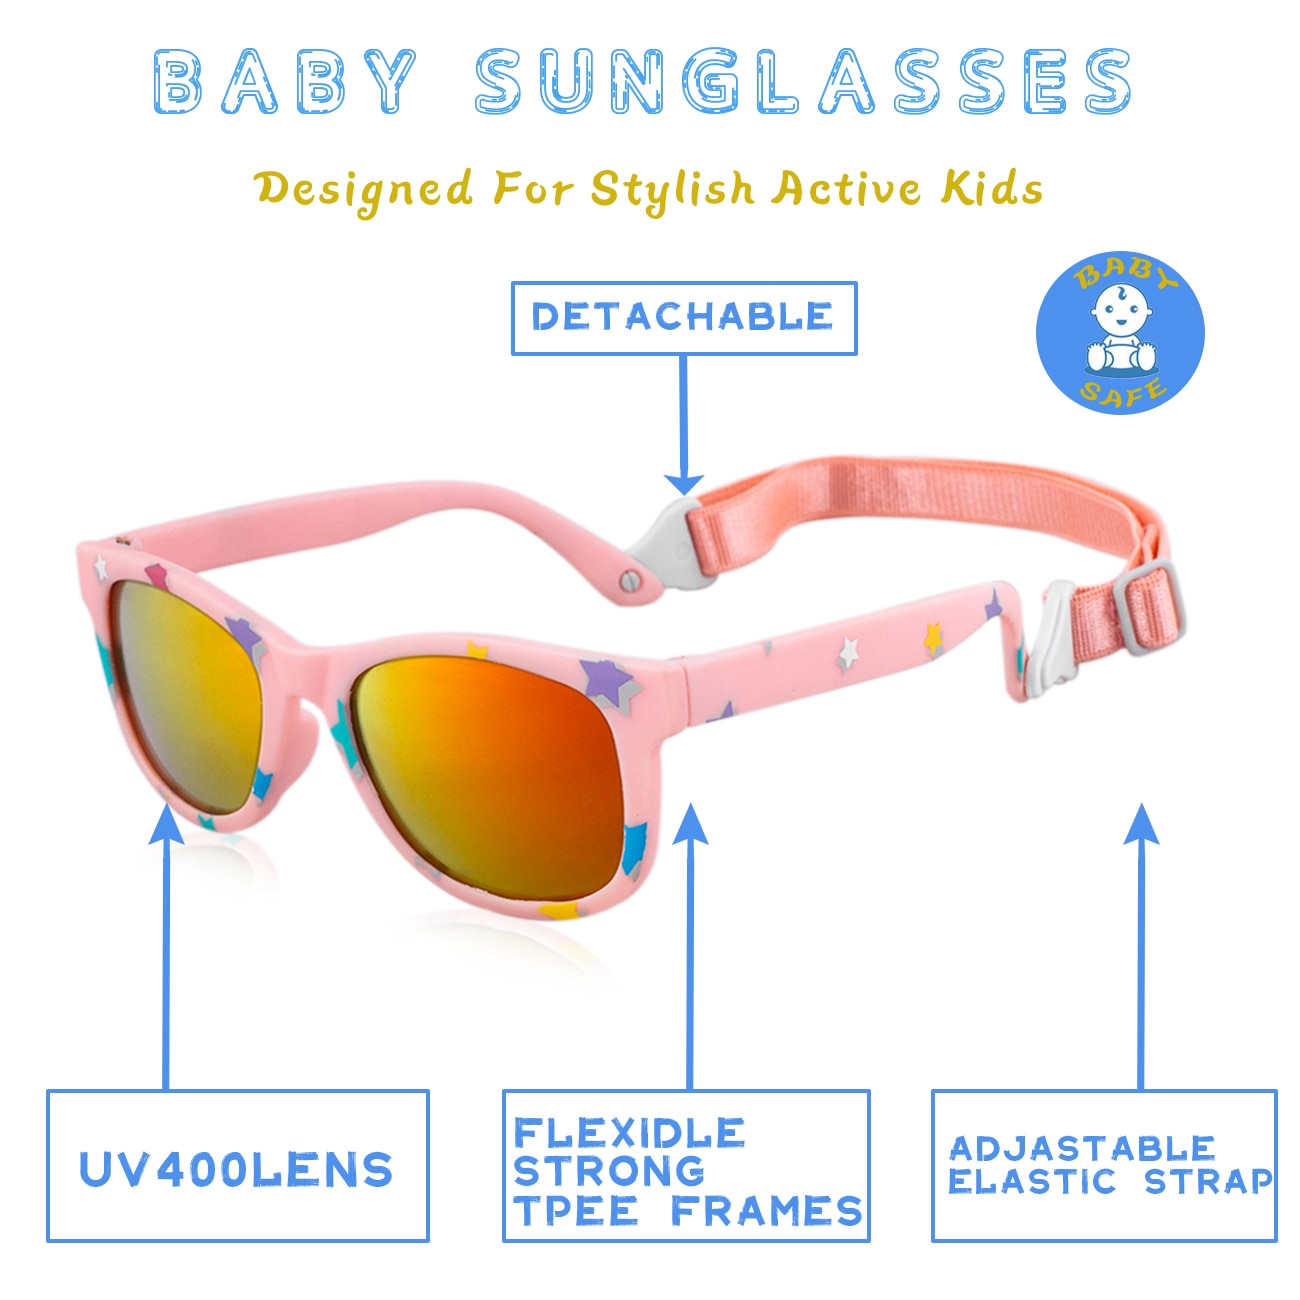 Baby Sunglasses Green Frame with Blue Mirrored Lenses 0-24 Months With Adjustable Strap